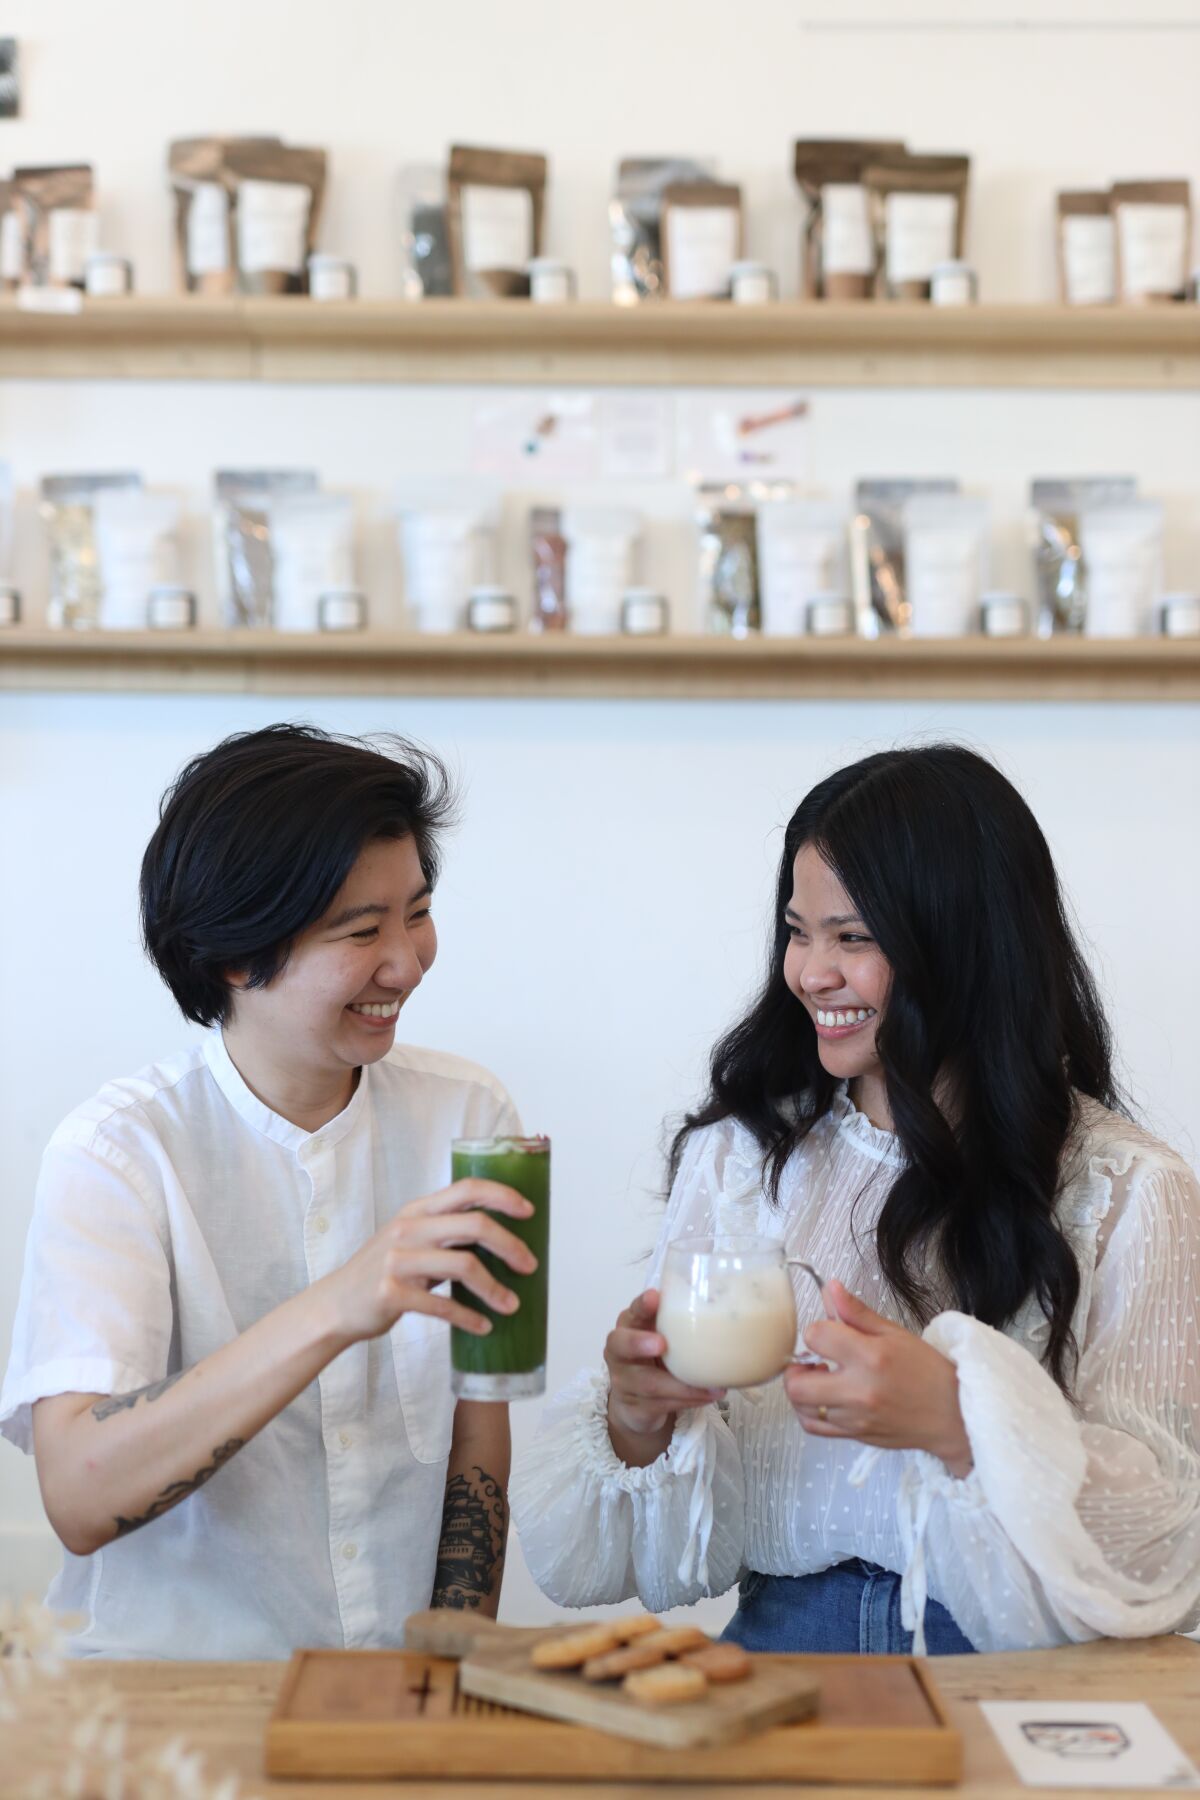 The La Jolla Community Center will present a seasonal tea tasting with Paru tea bar owners Amy Troung and Lani Gobaleza. 